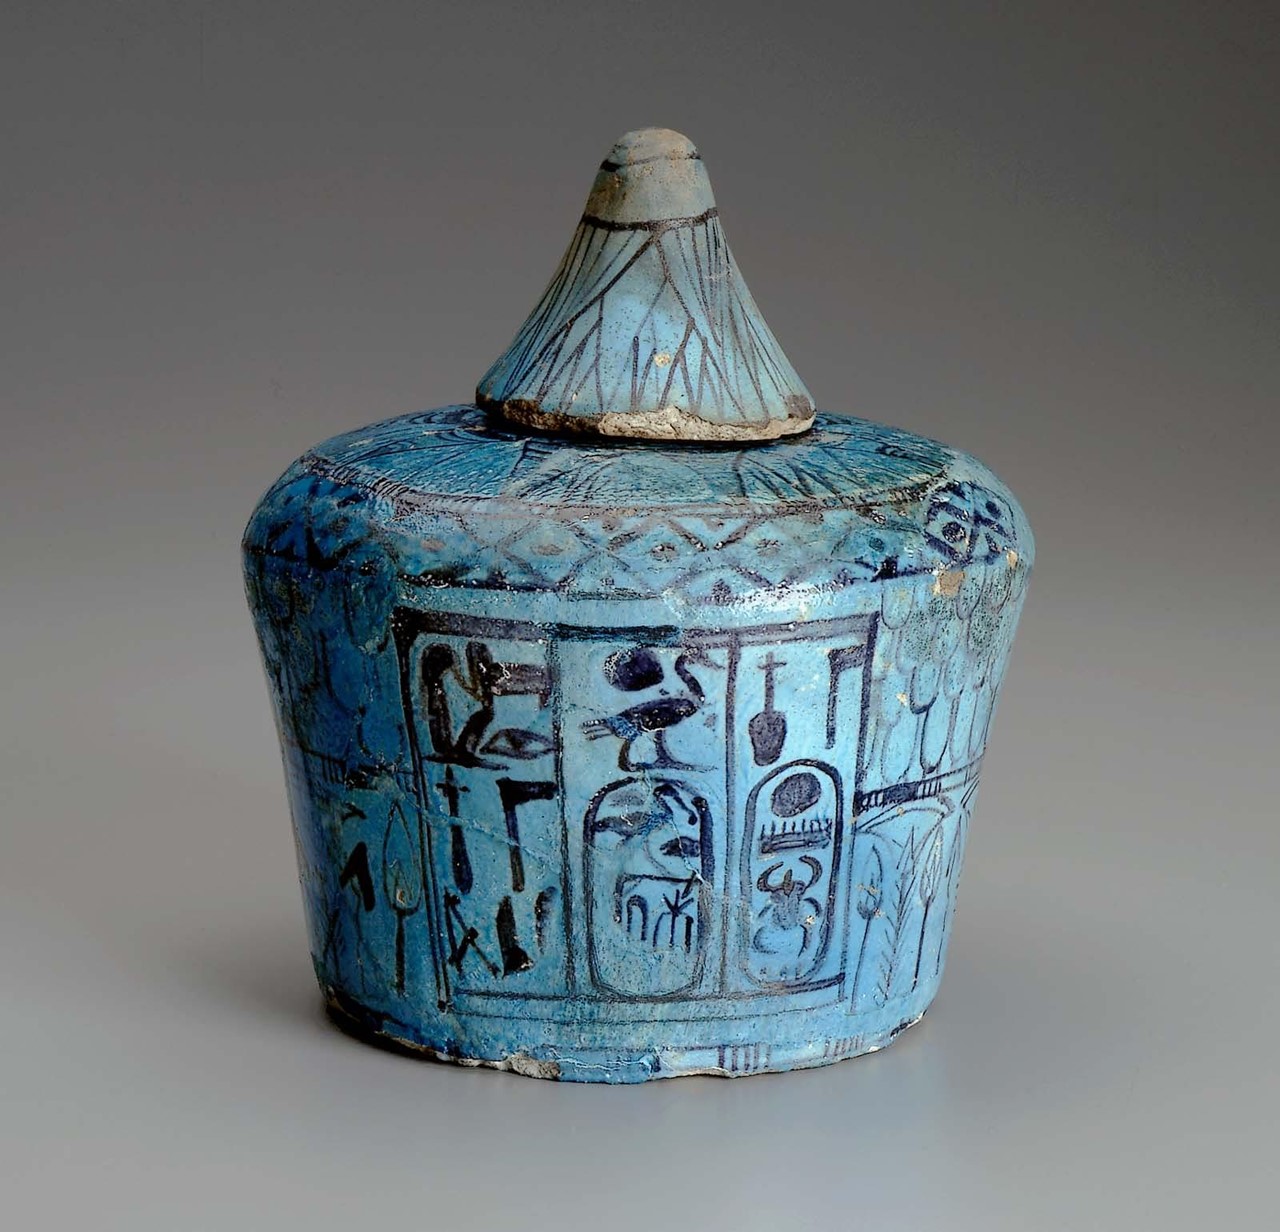 Blue faience funerary vessel (with lid) from the tomb of Thutmose IV. The border of scale patterns and lotus, as well as the text, are painted in deep violet manganese pigment. https://collections.mfa.org/objects/104/ritual-vessel-nemsetjar-with-lid